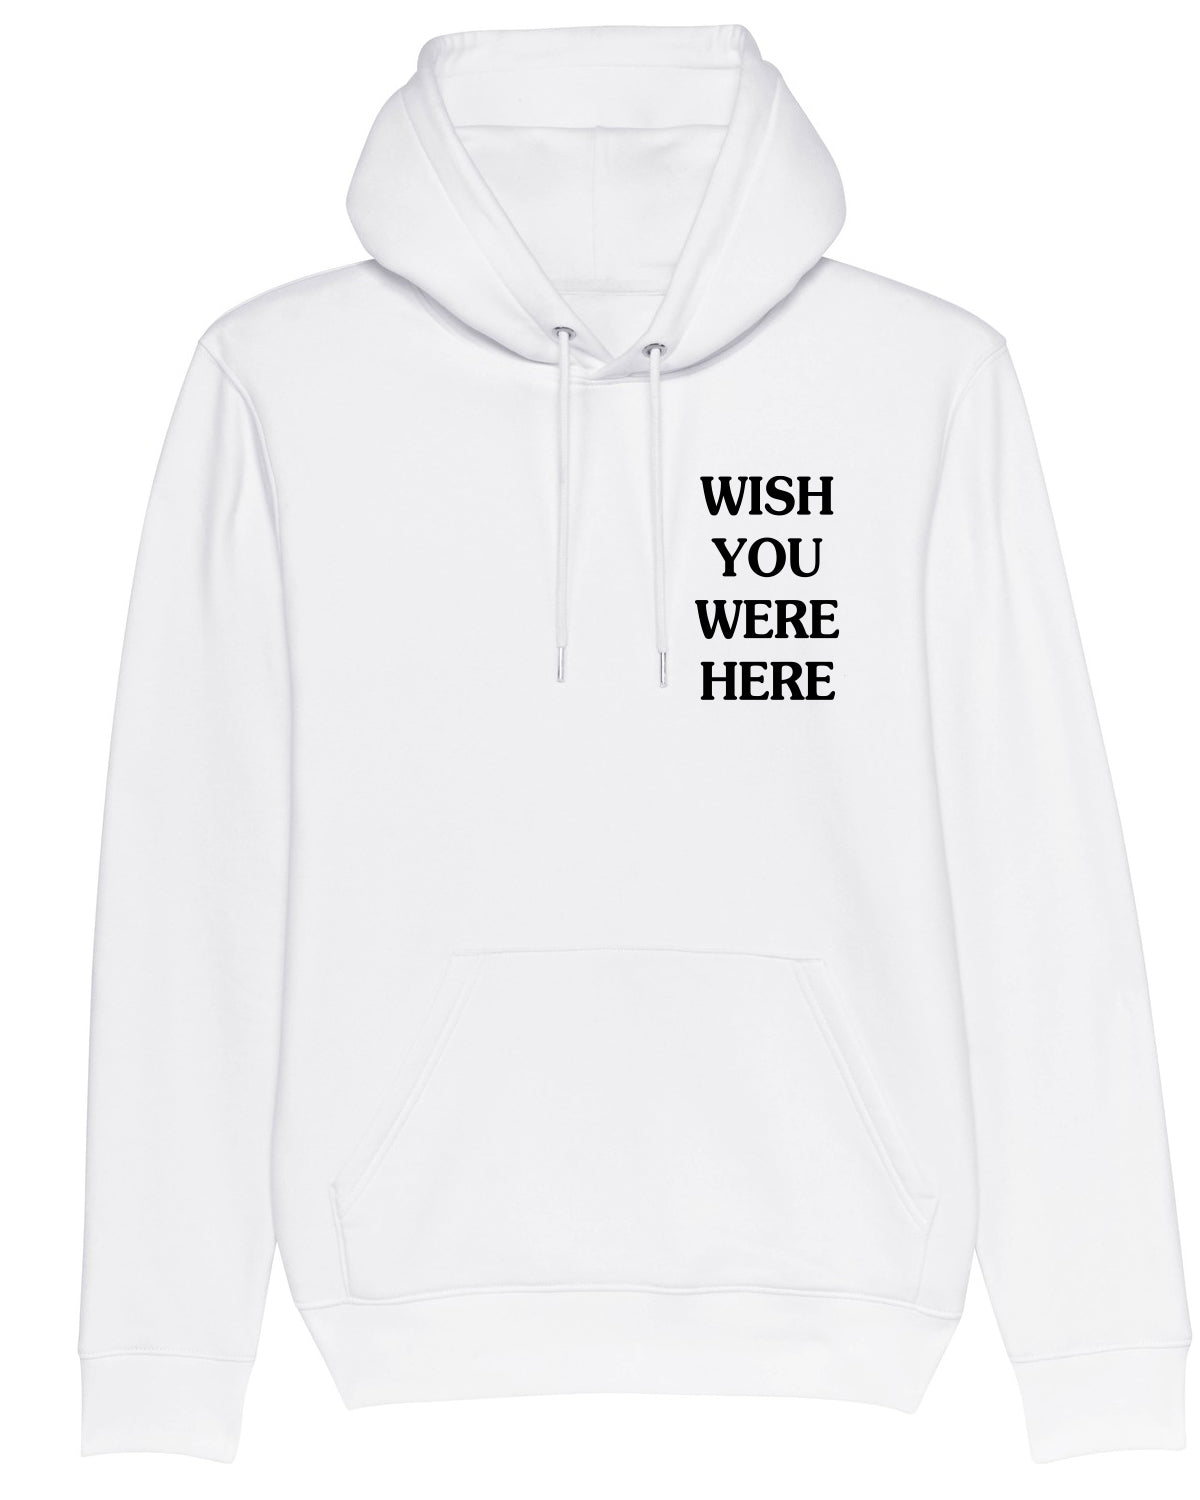 Hoodie Don't Mess With Texas Wish you were here White